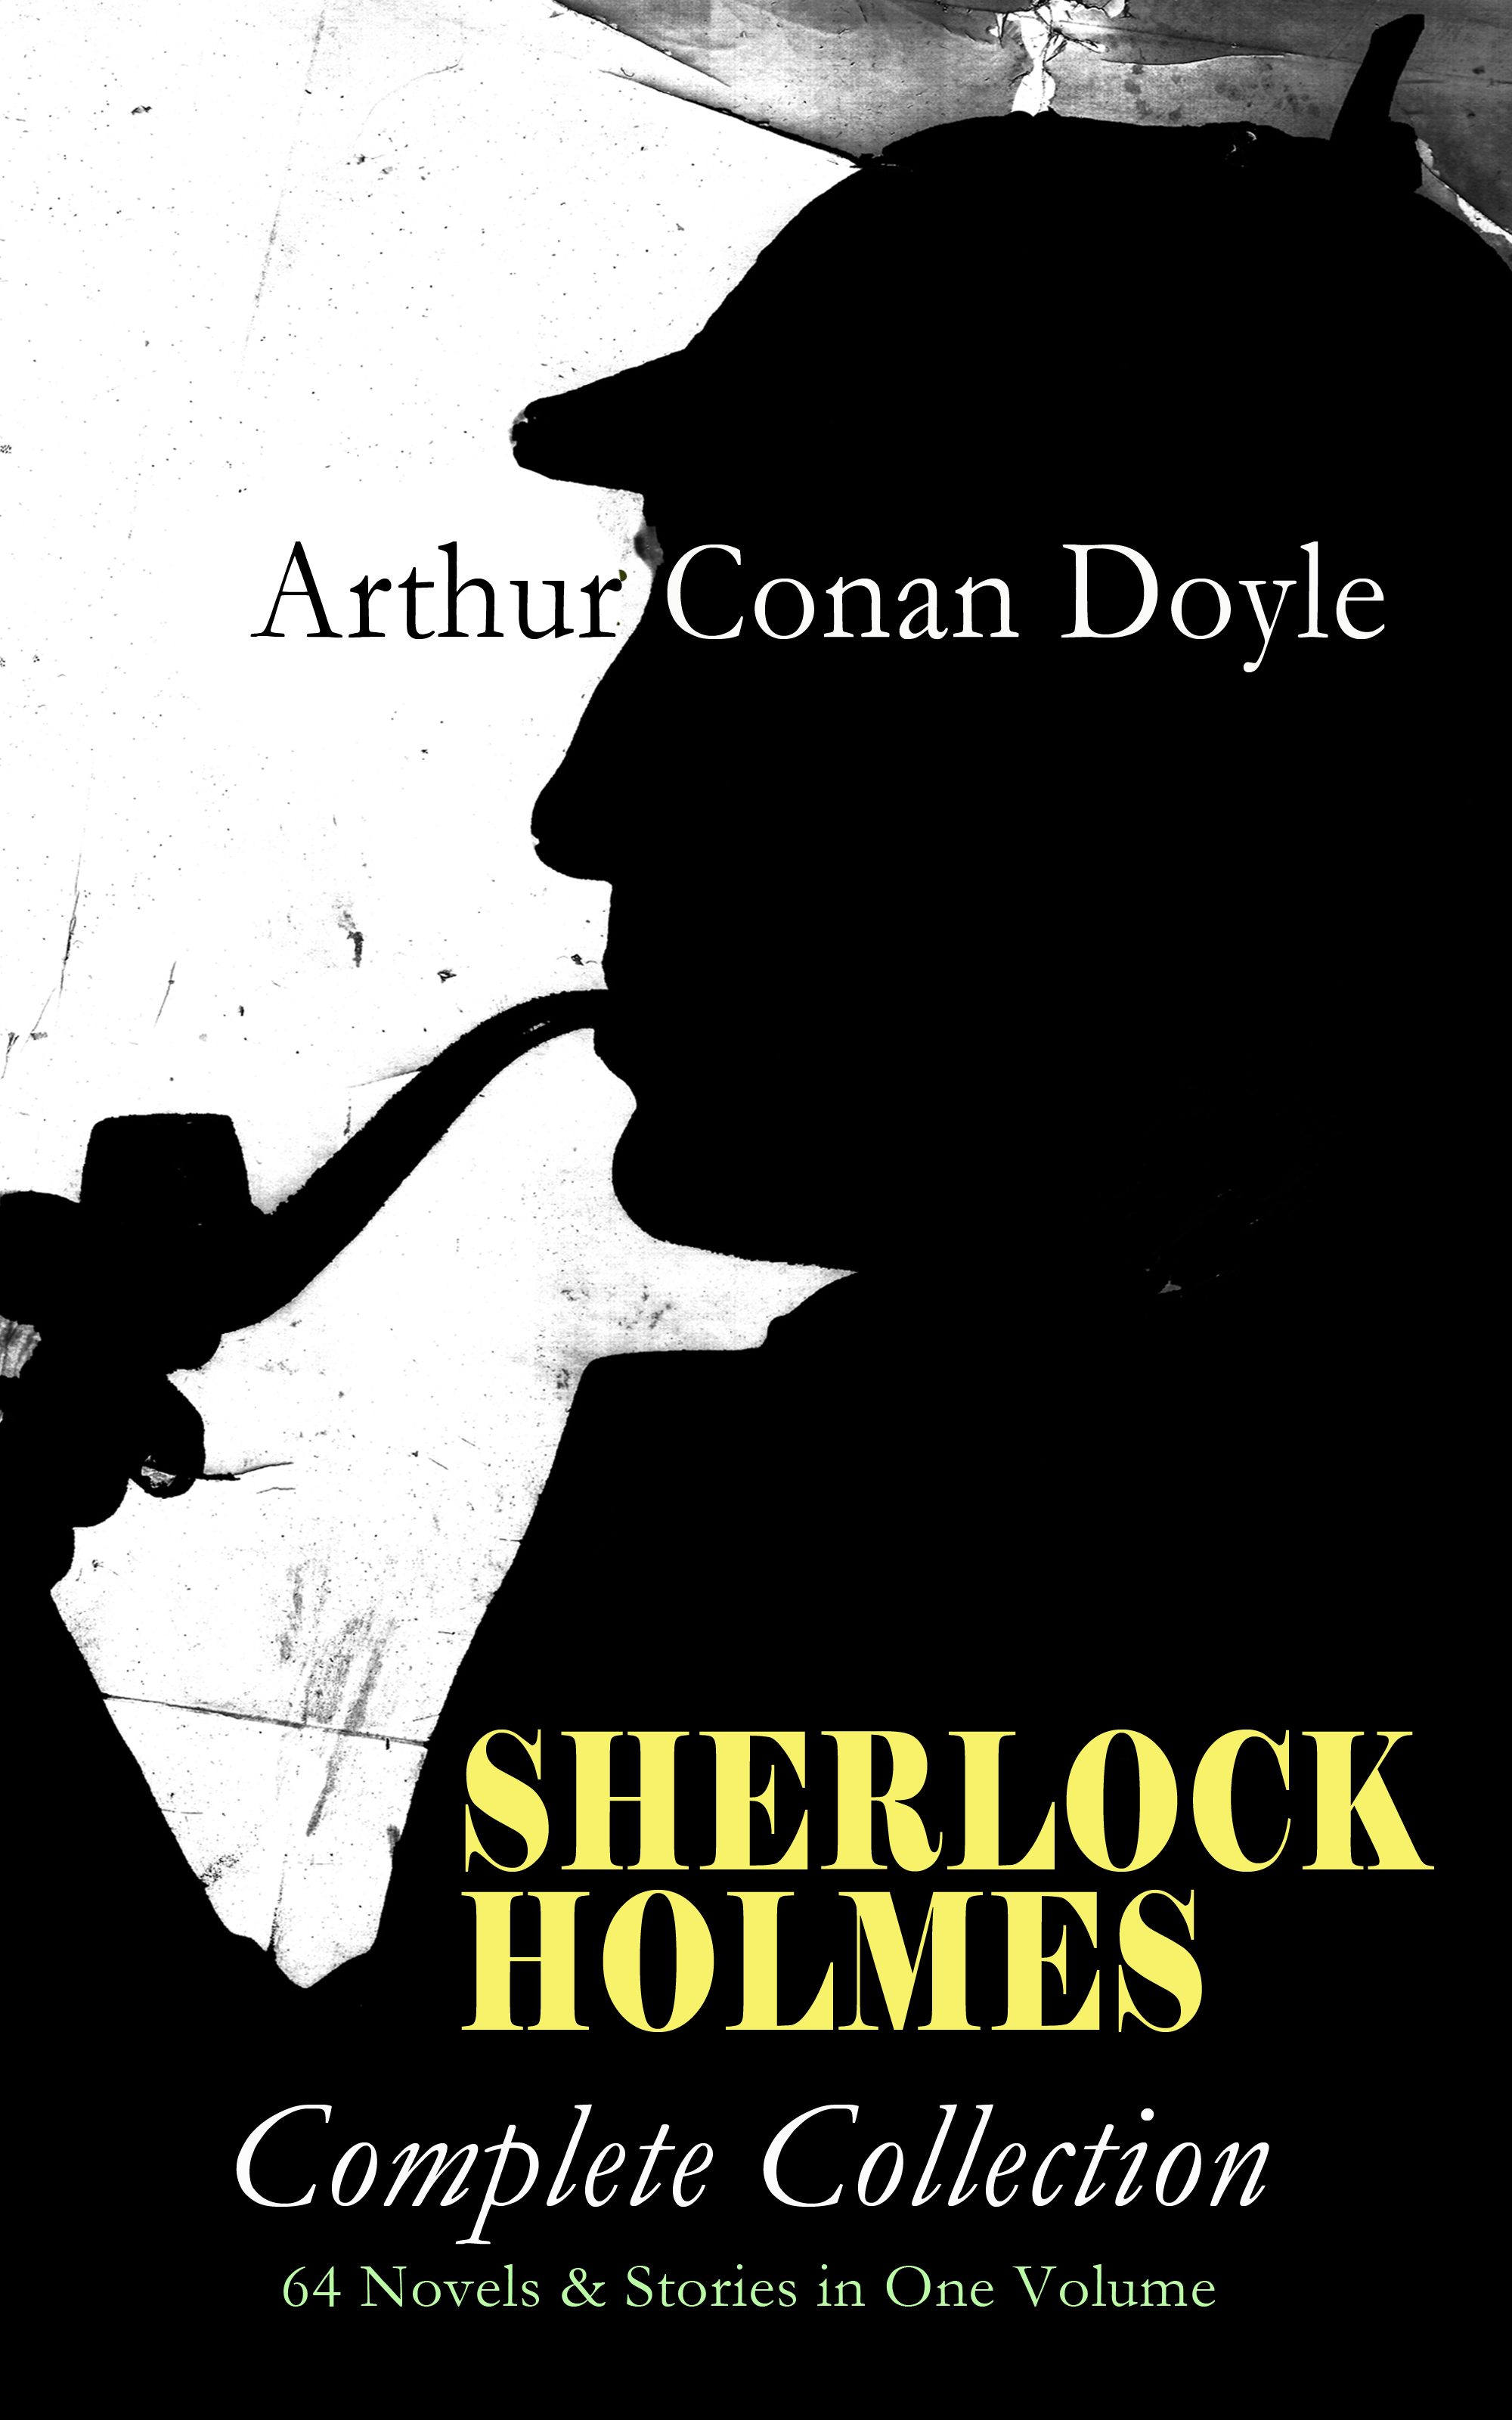 sherlock holmes the complete illustrated collection